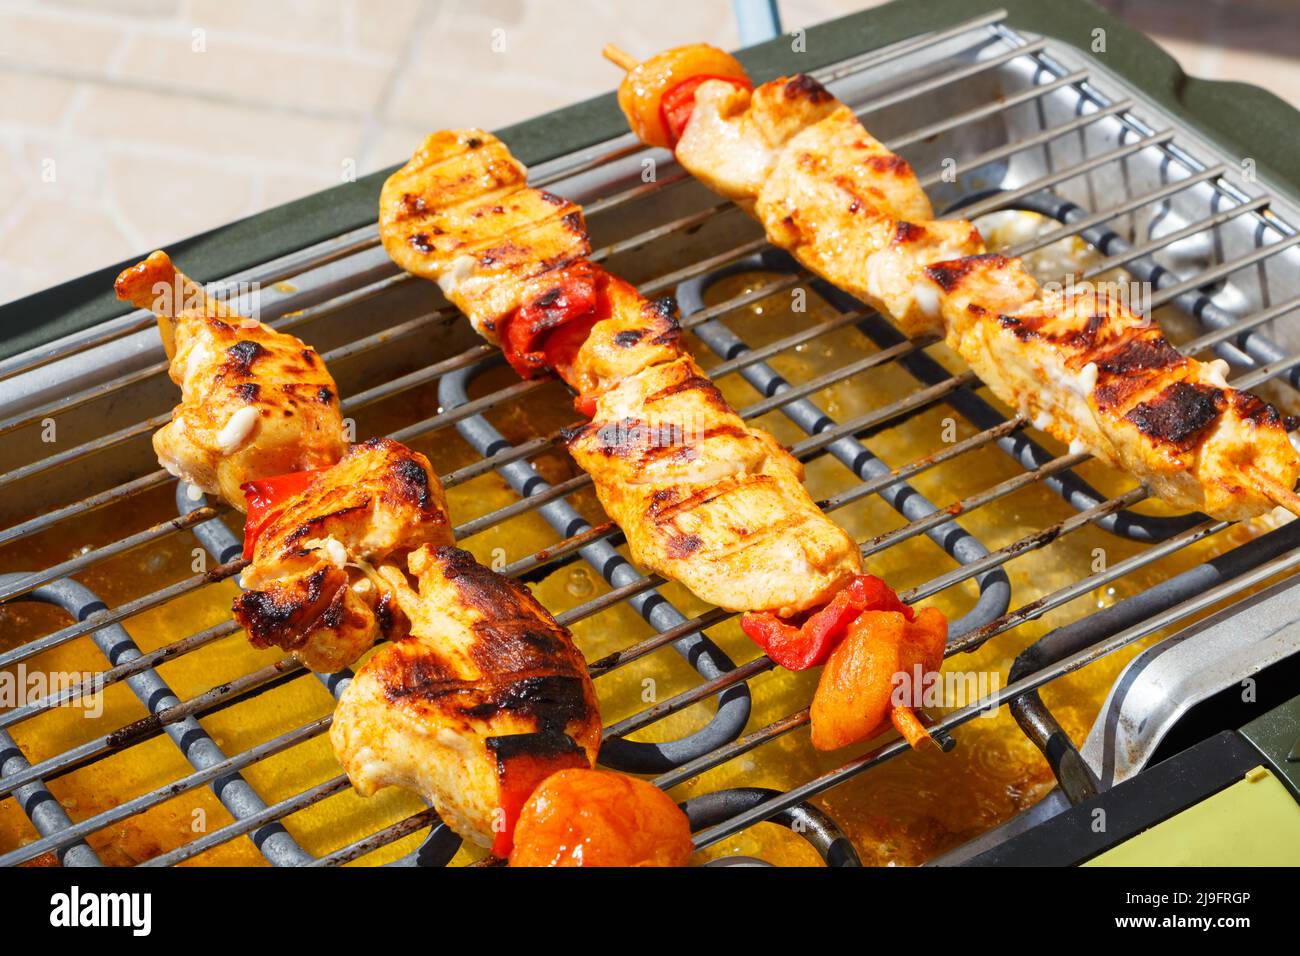 Marinated chicken brochette on the grid of an electric barbecue Stock Photo